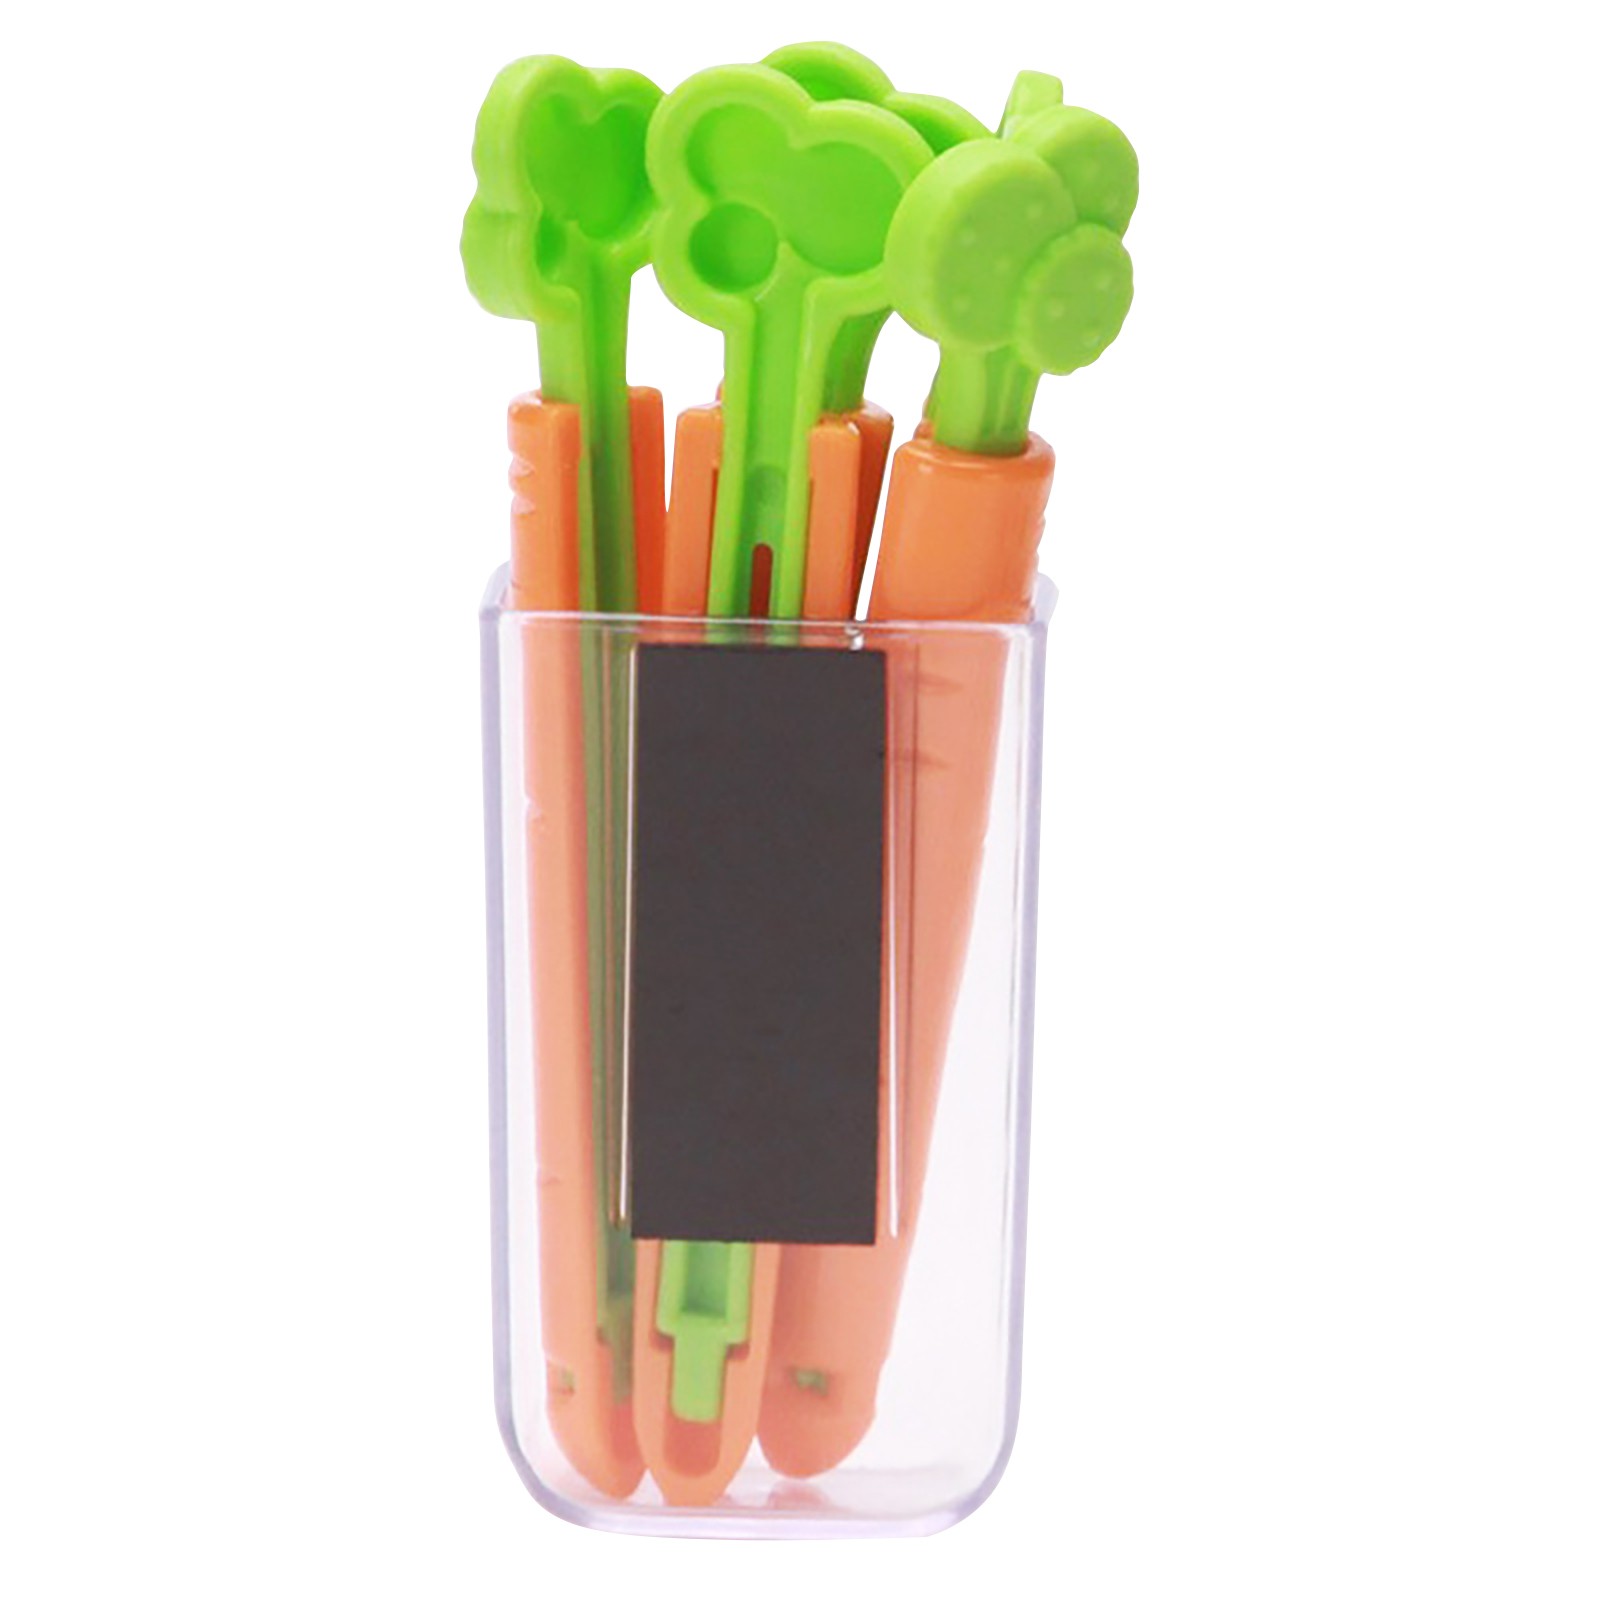 1pc food fee sealing clip snack bag sealing clip fresh moisture-proof snack potato chips household kitchen snap-on sealing clip